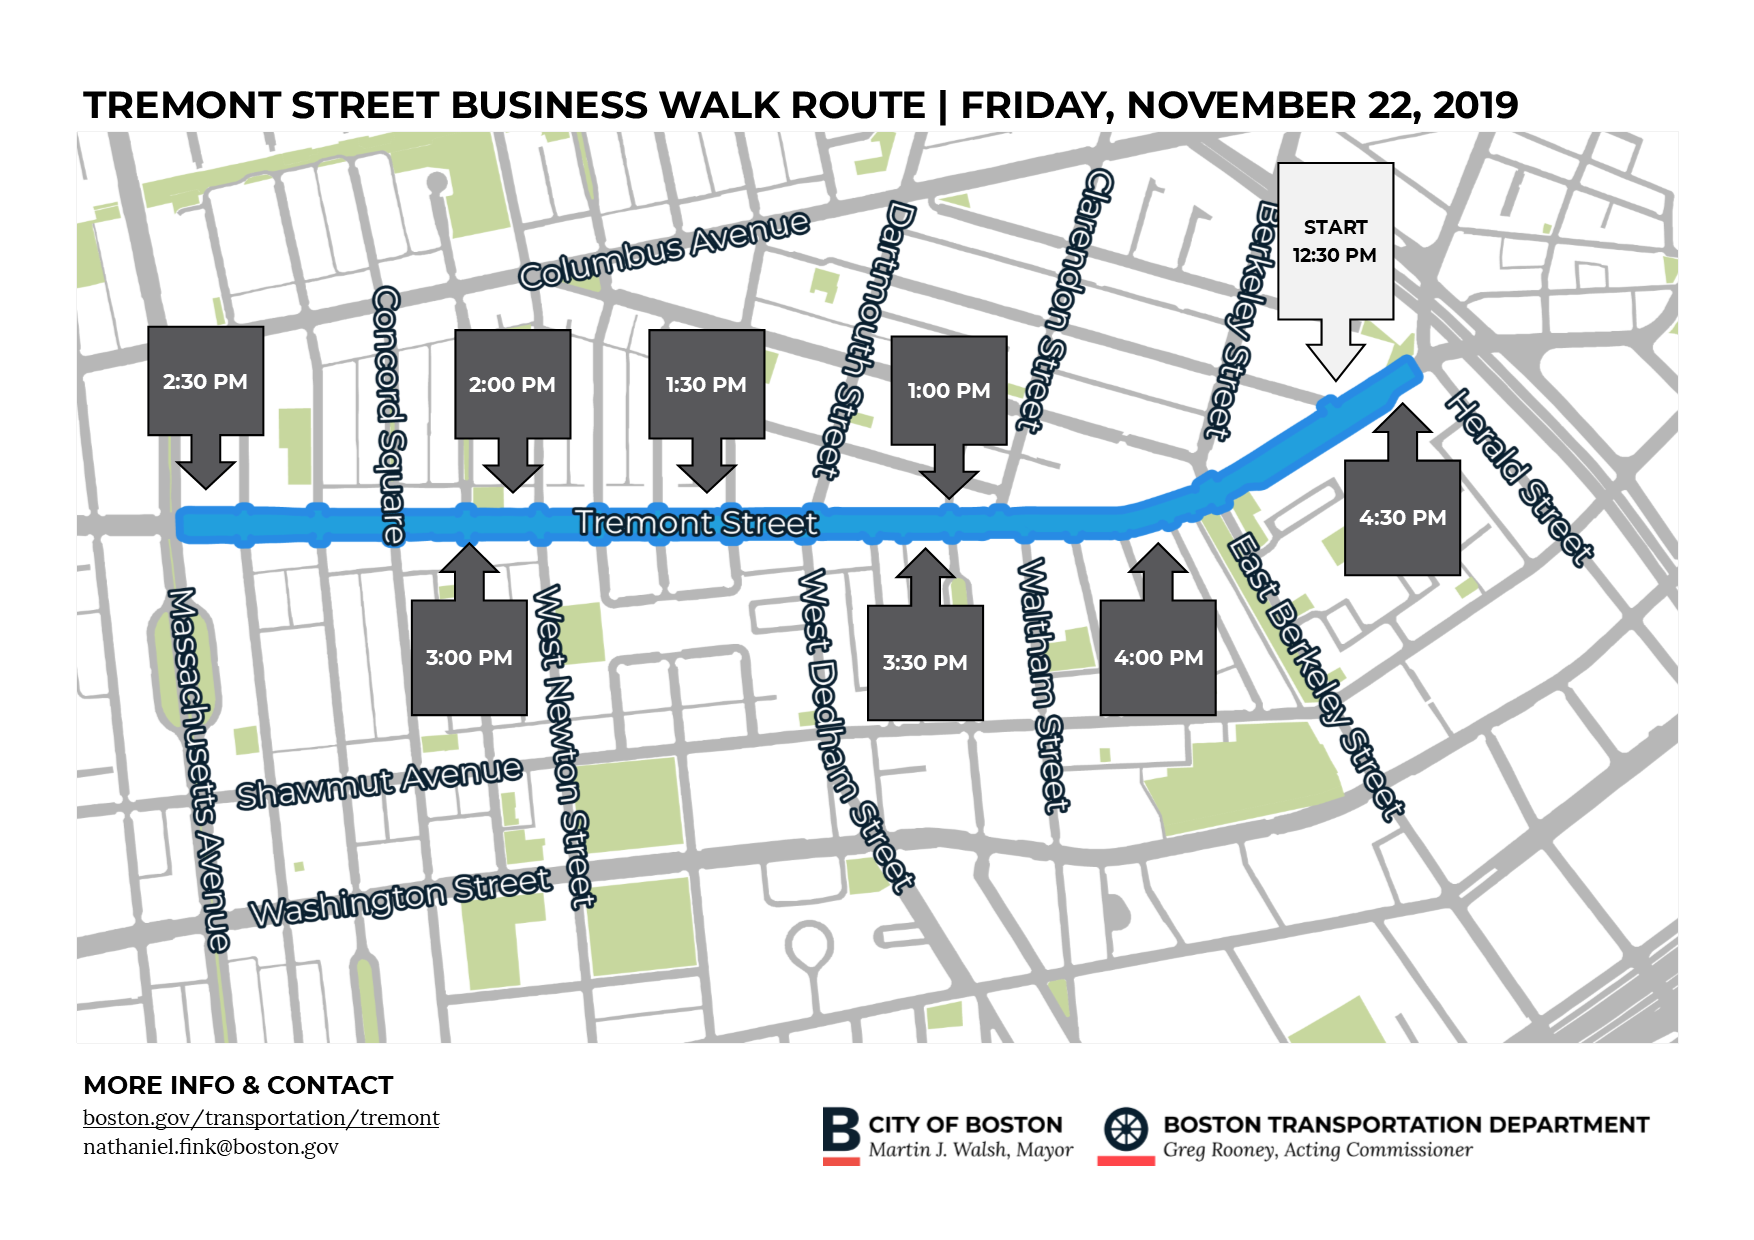 Image for 2019 11 06 business walk map